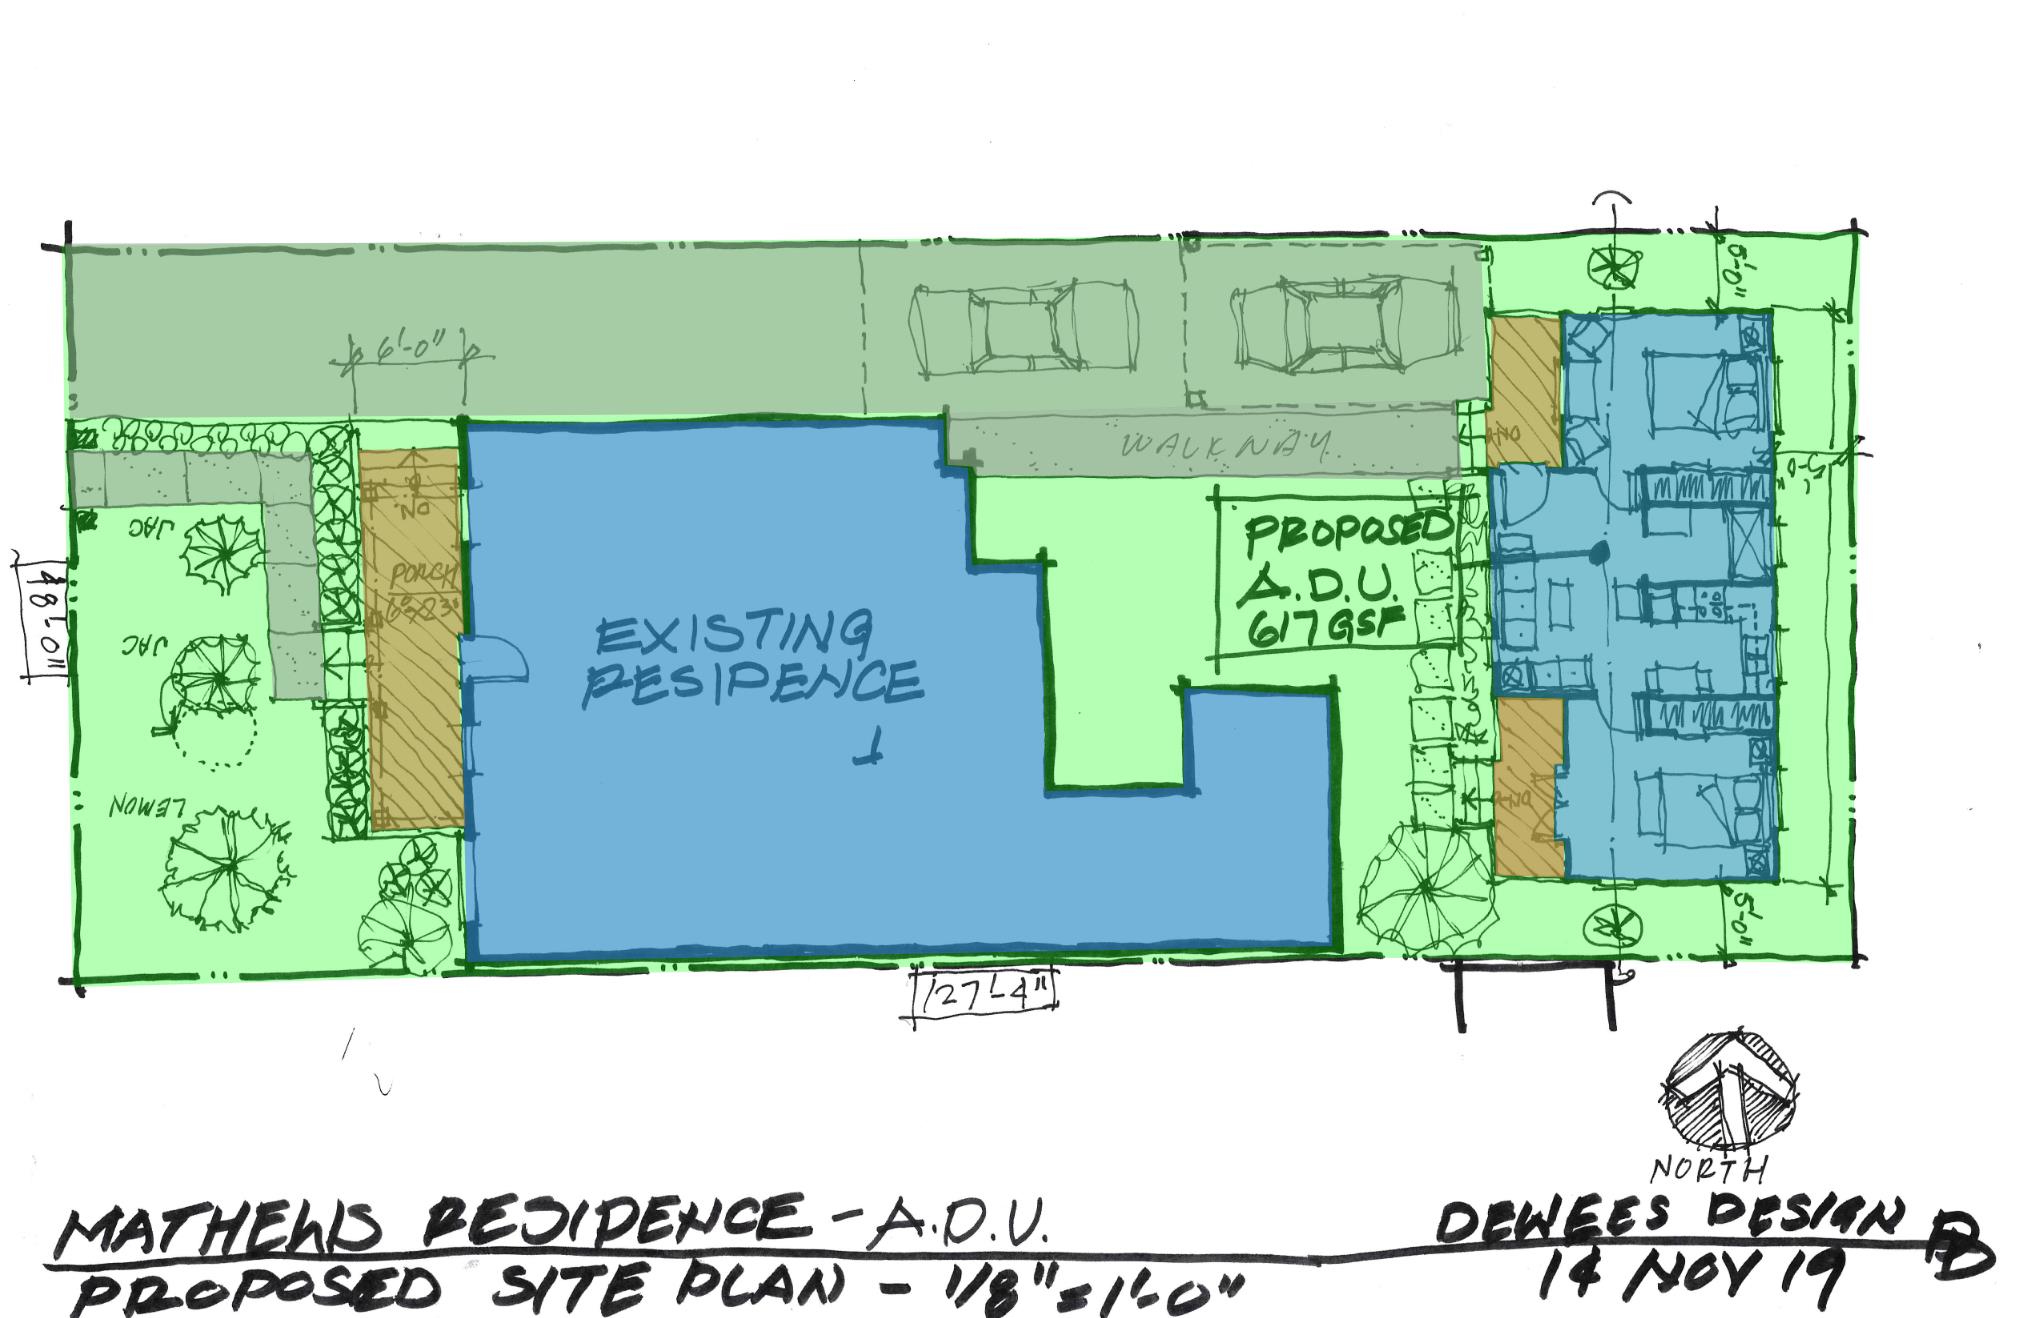 Pages from Mathews Residence - COLORED SITE PLAN